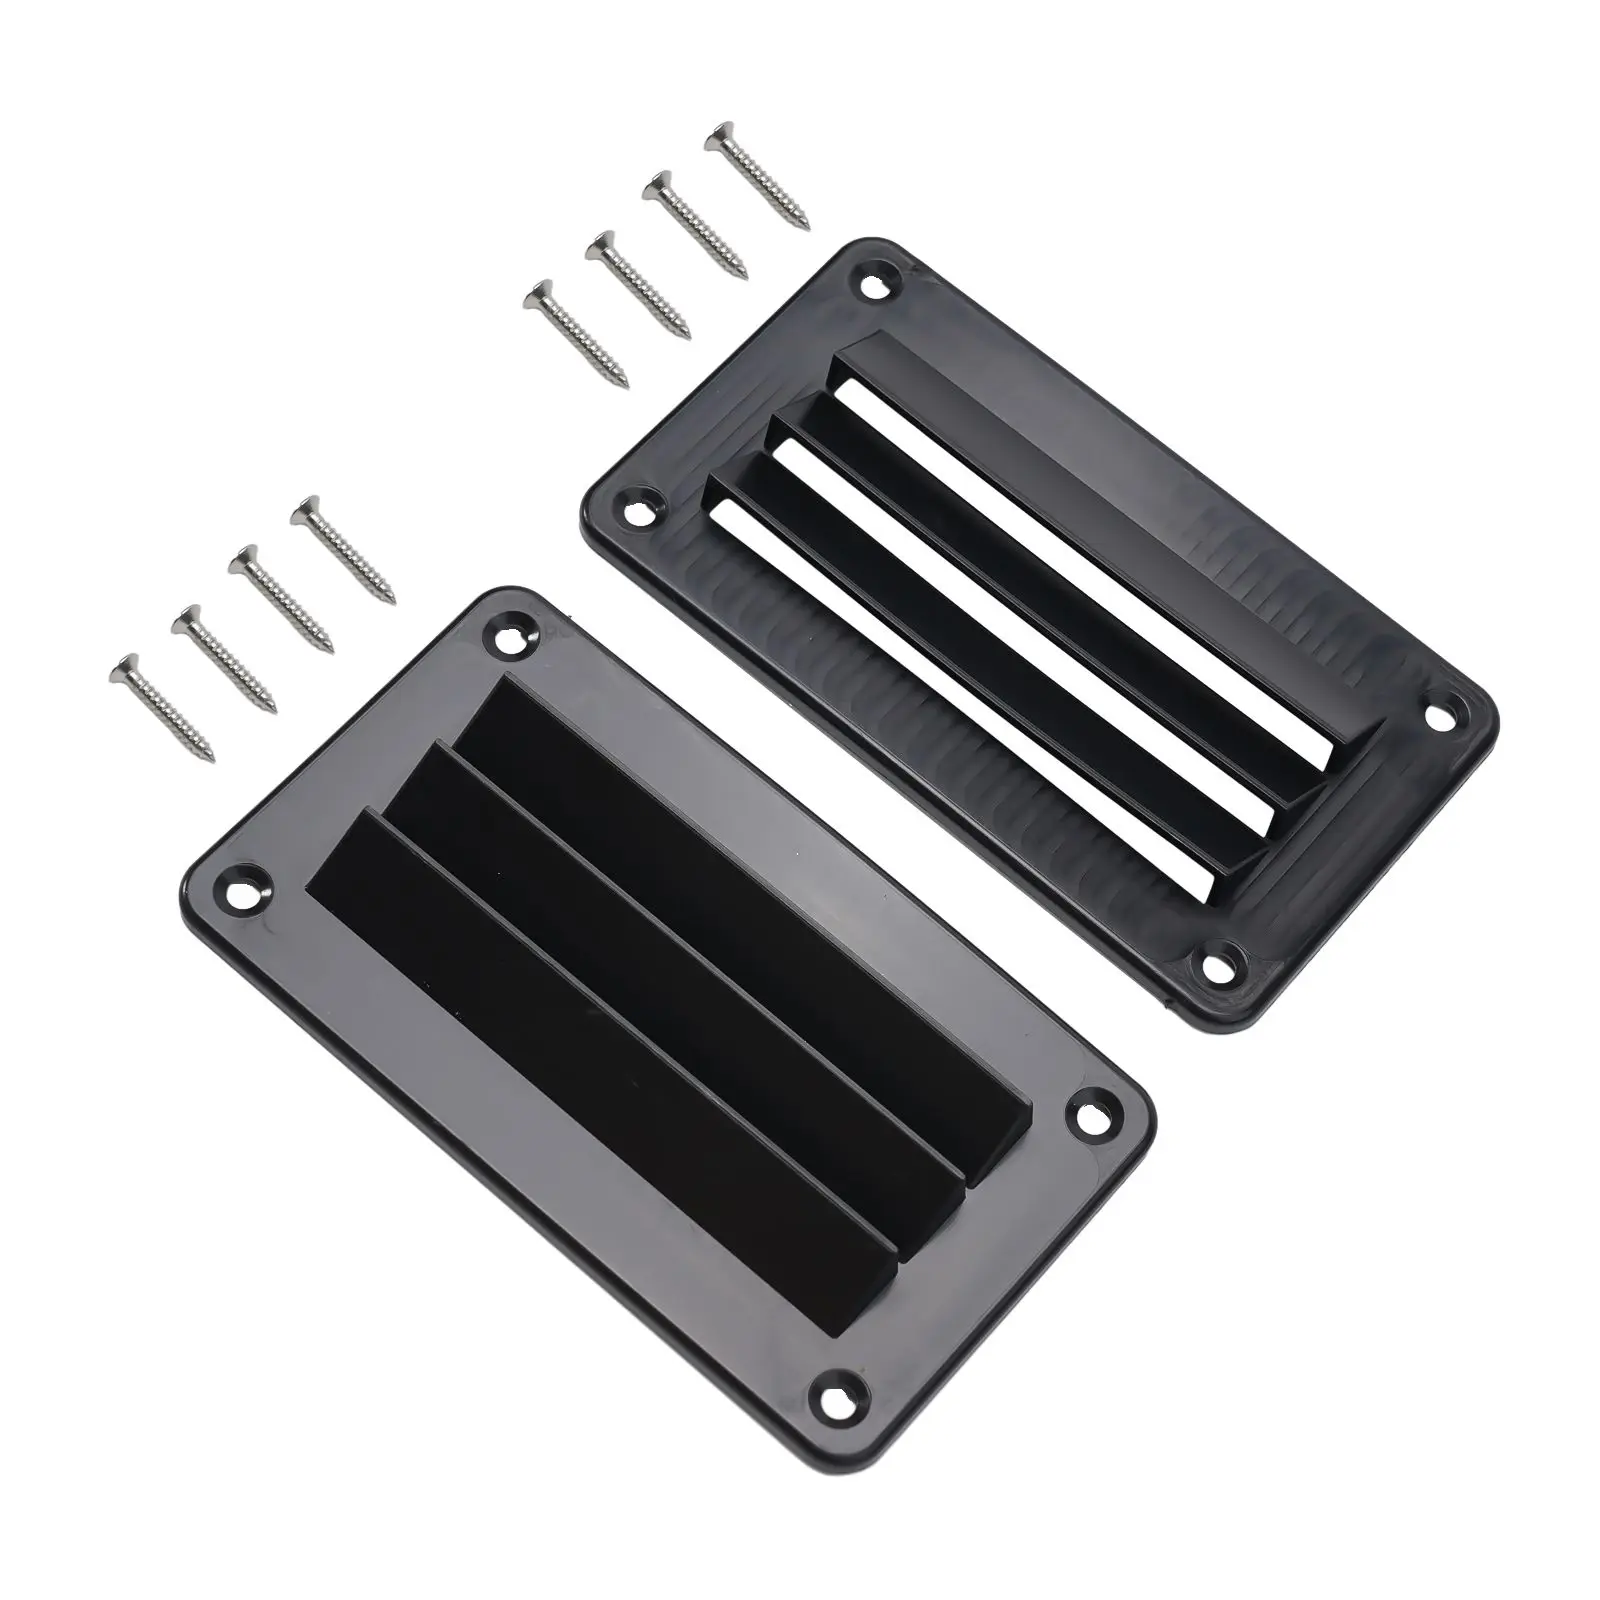 

2pcs RV Air Vent Cover Exhaust Outlet Louver Ceiling Vent Bathroom Office Ventilation Outlet Grille Heating Cooling Systems